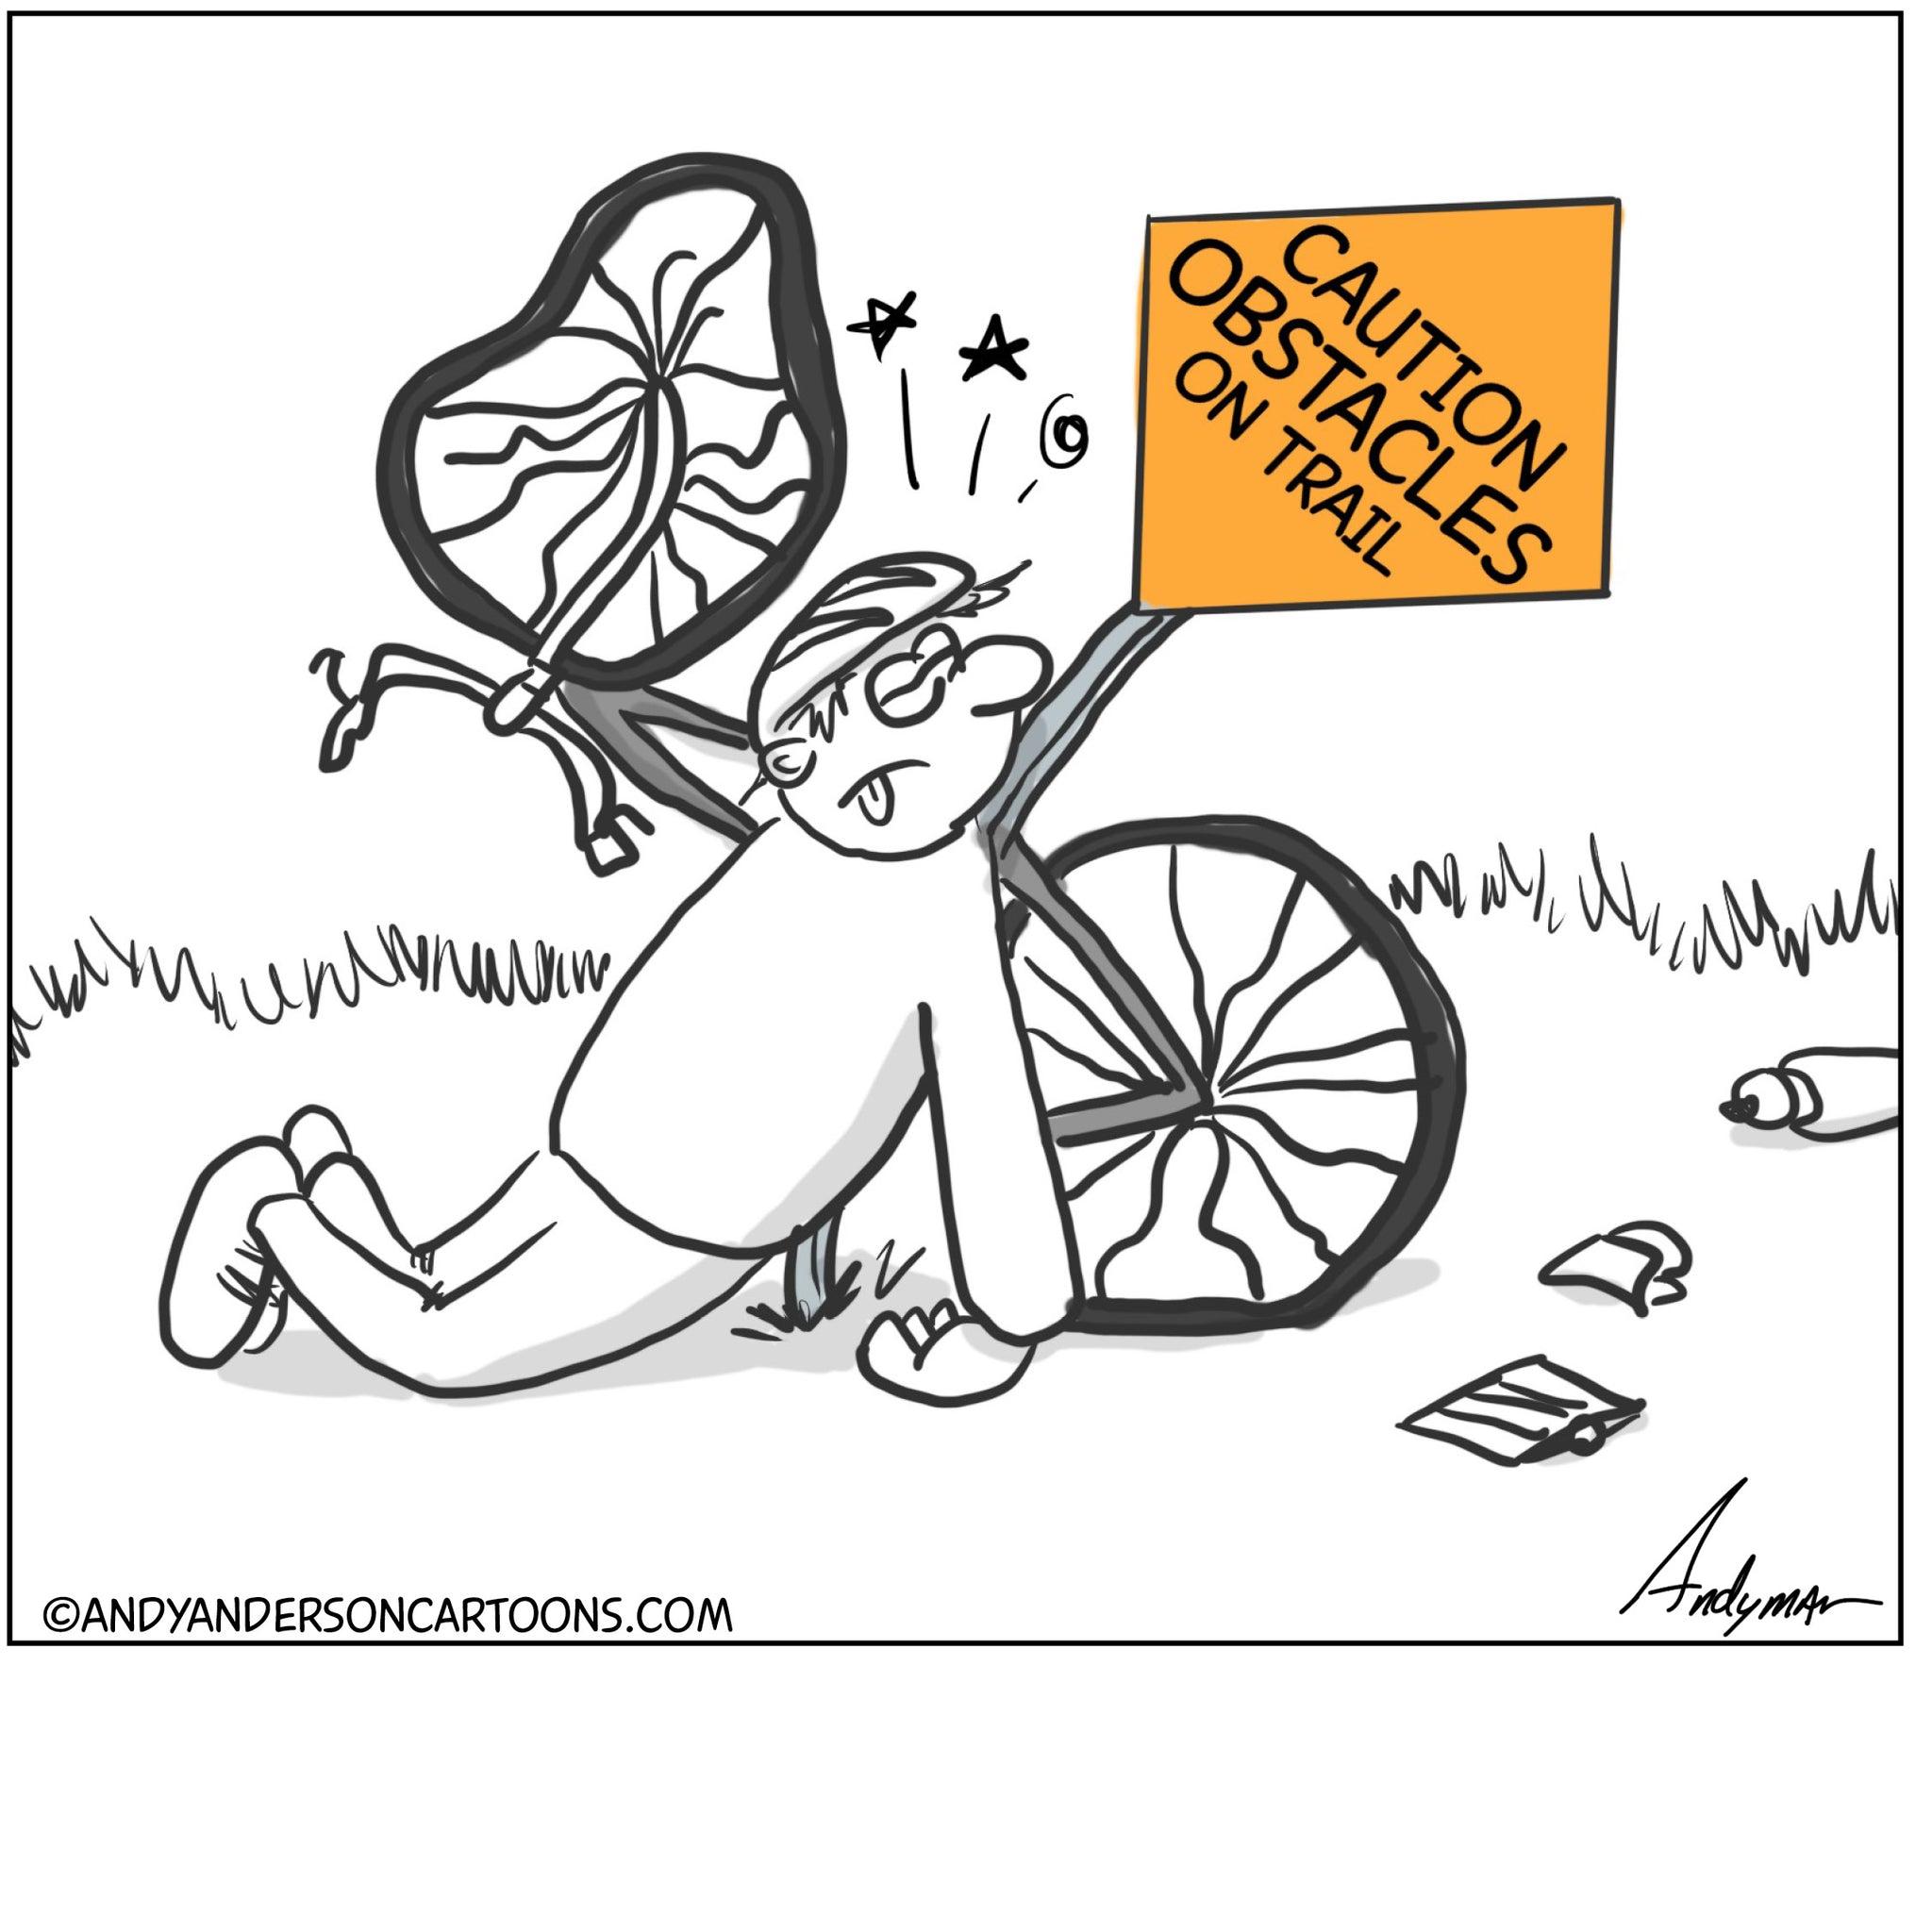 Obstacles Cartoon | Watch For Signs